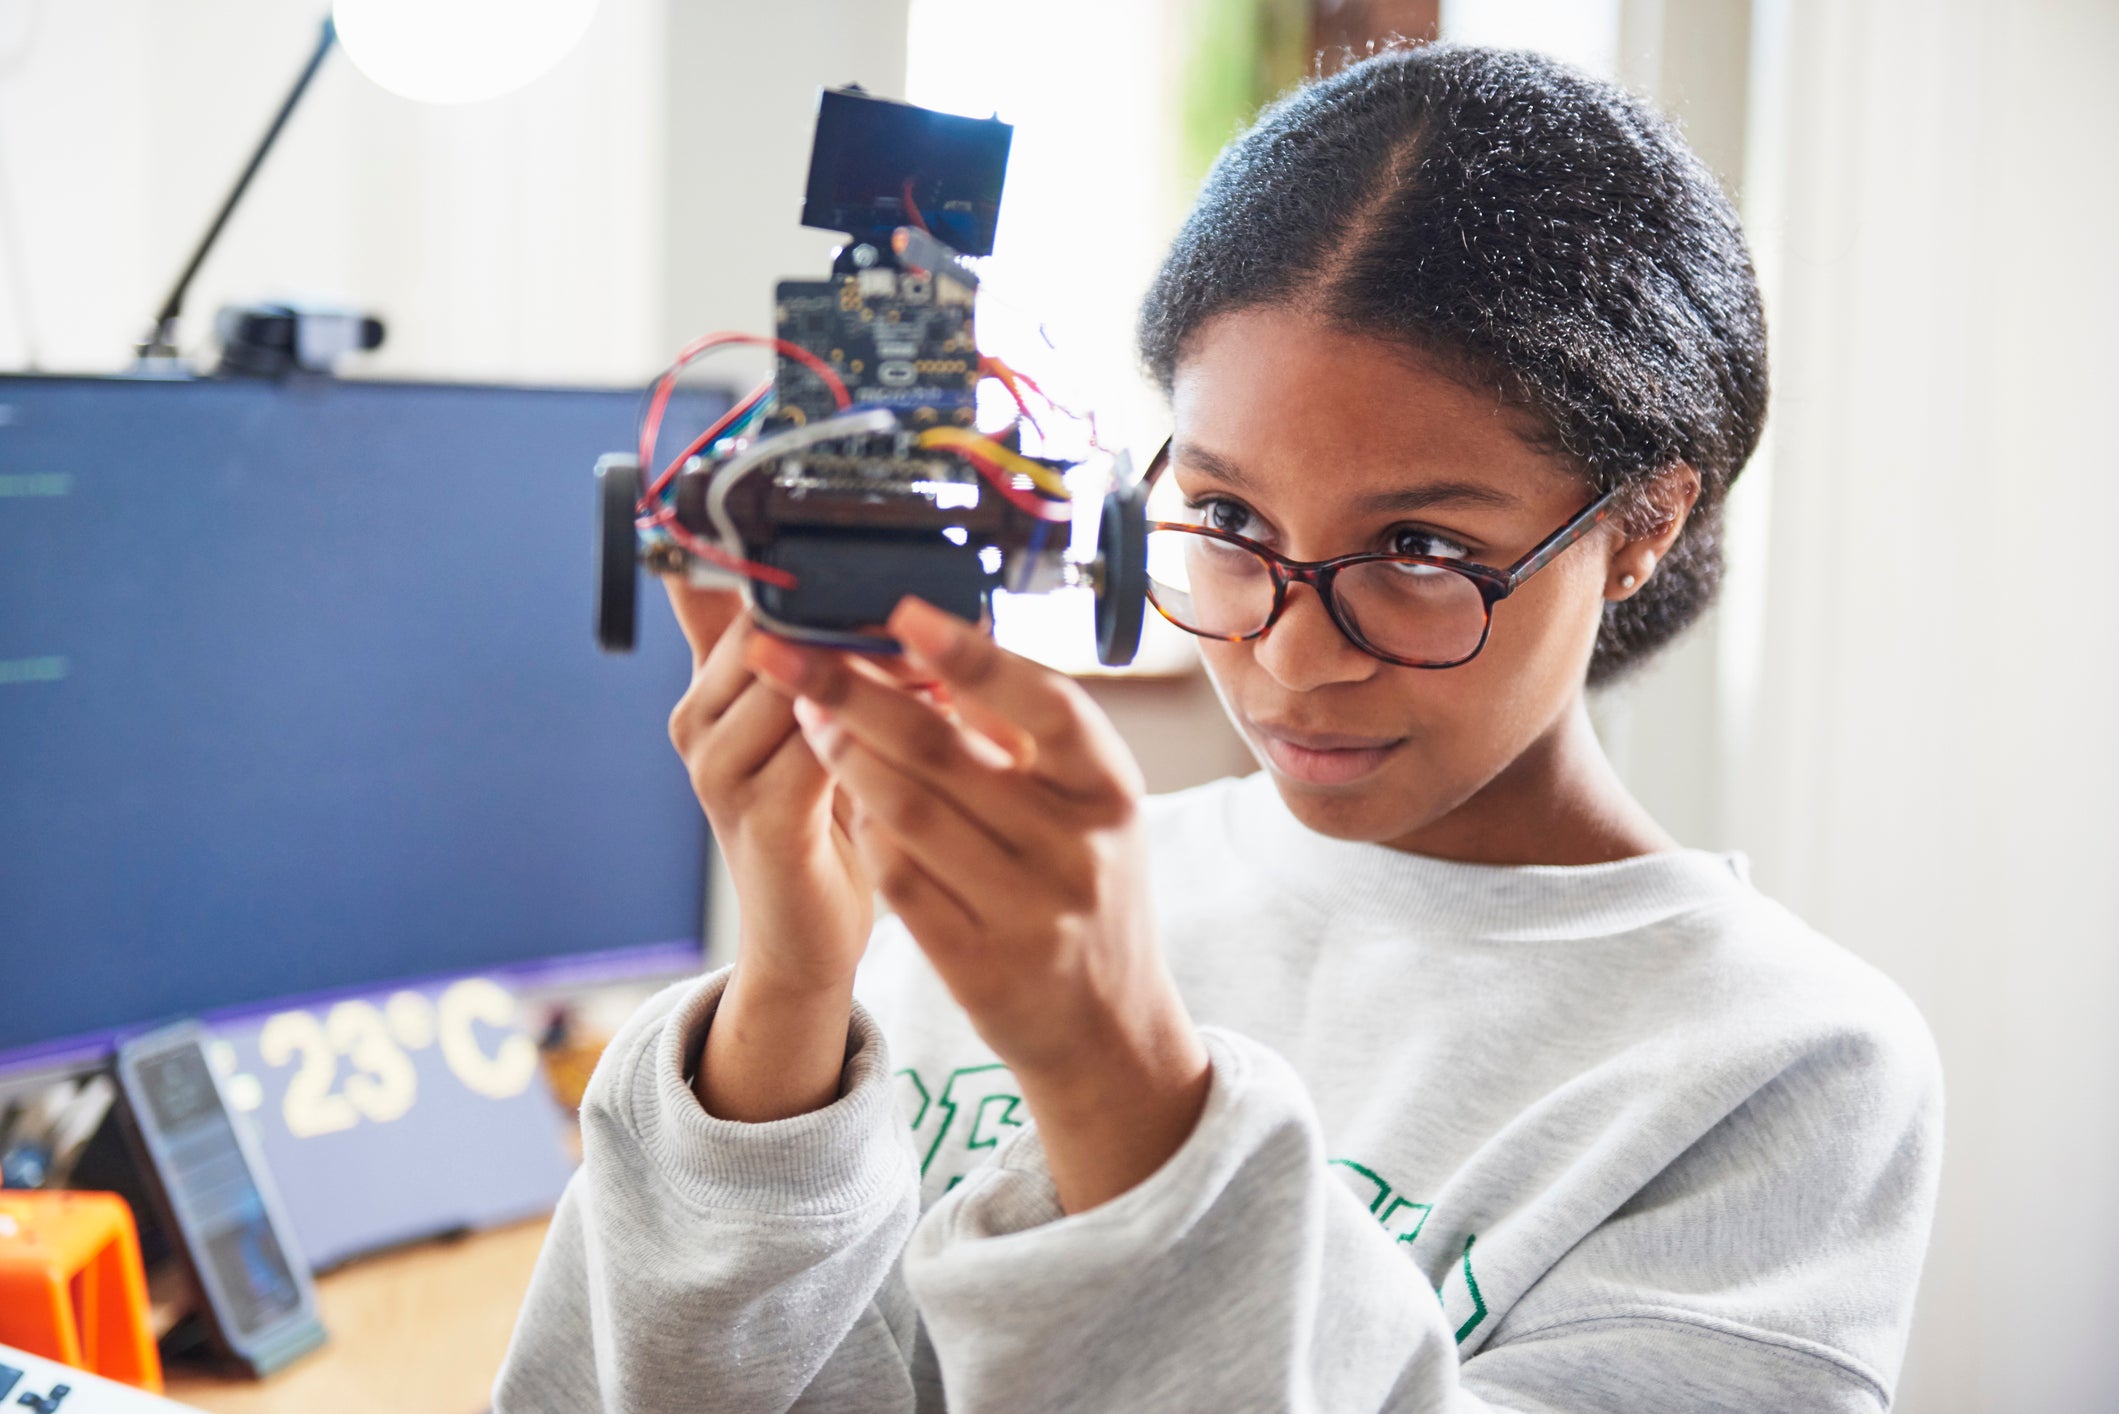 Black Children Are Highly Interested In STEM Careers—They Just Lack Early Access, According To New Data